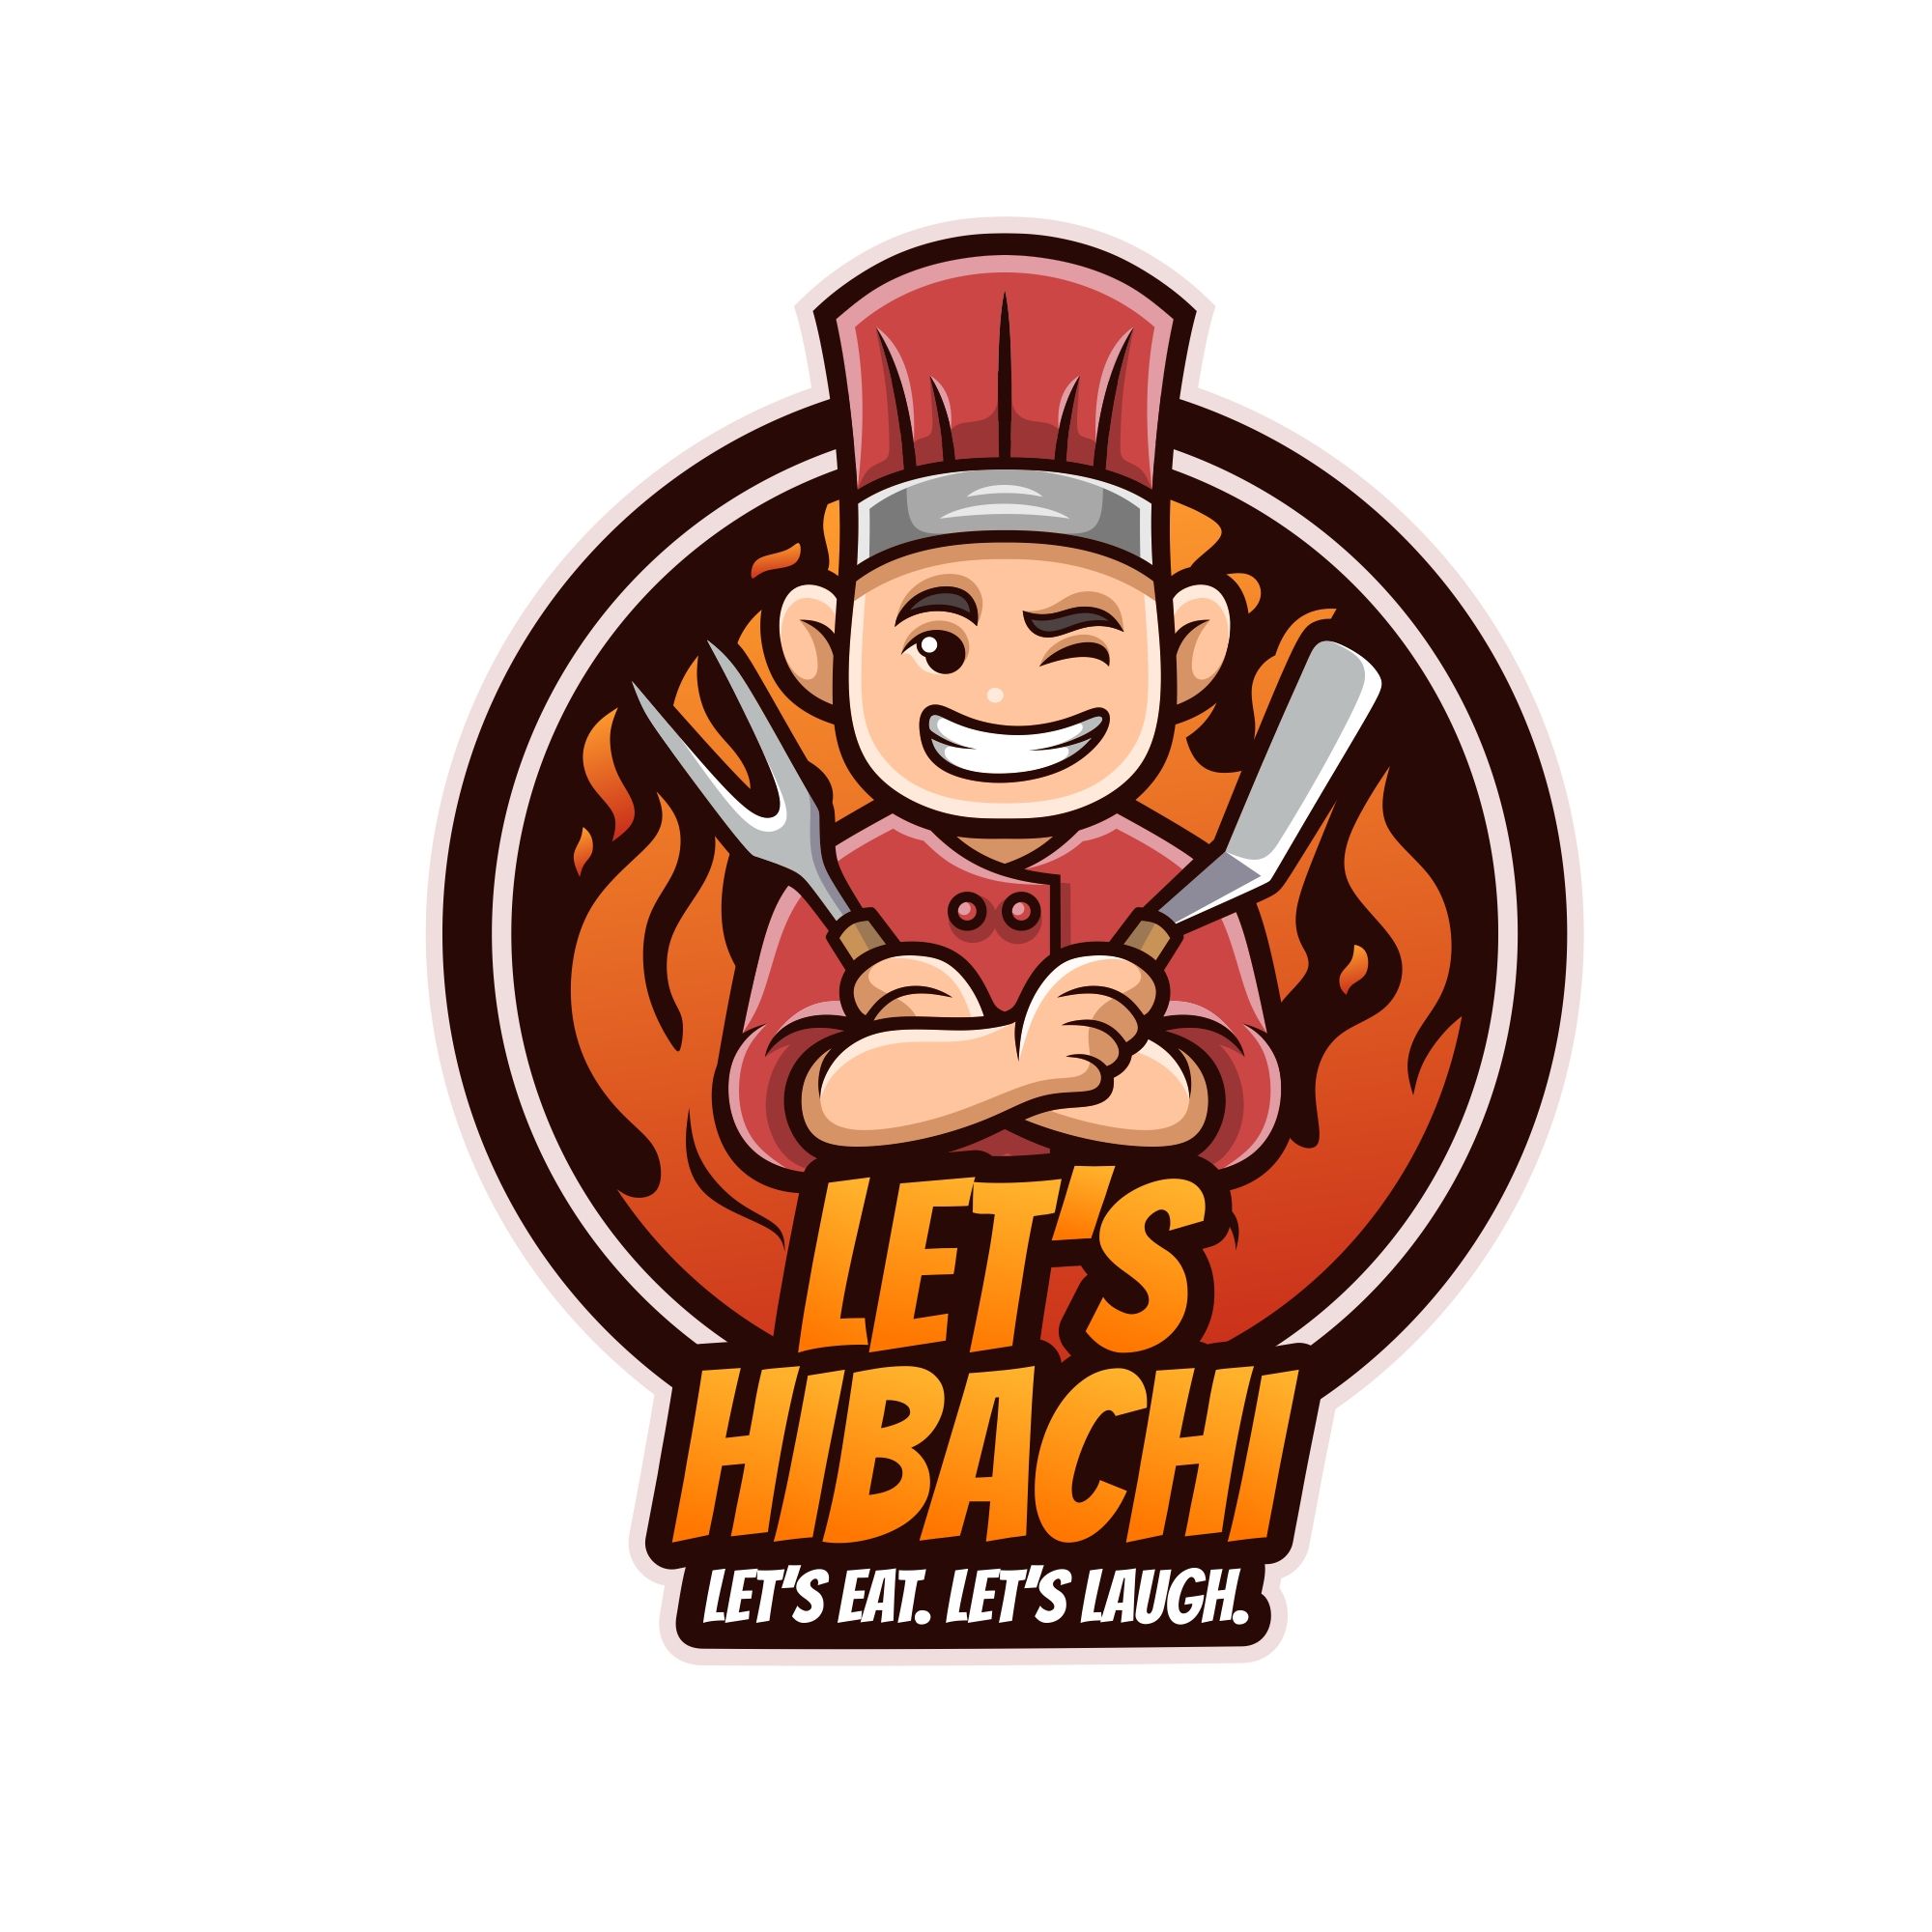 Elevating Your Event with Let’s Hibachi